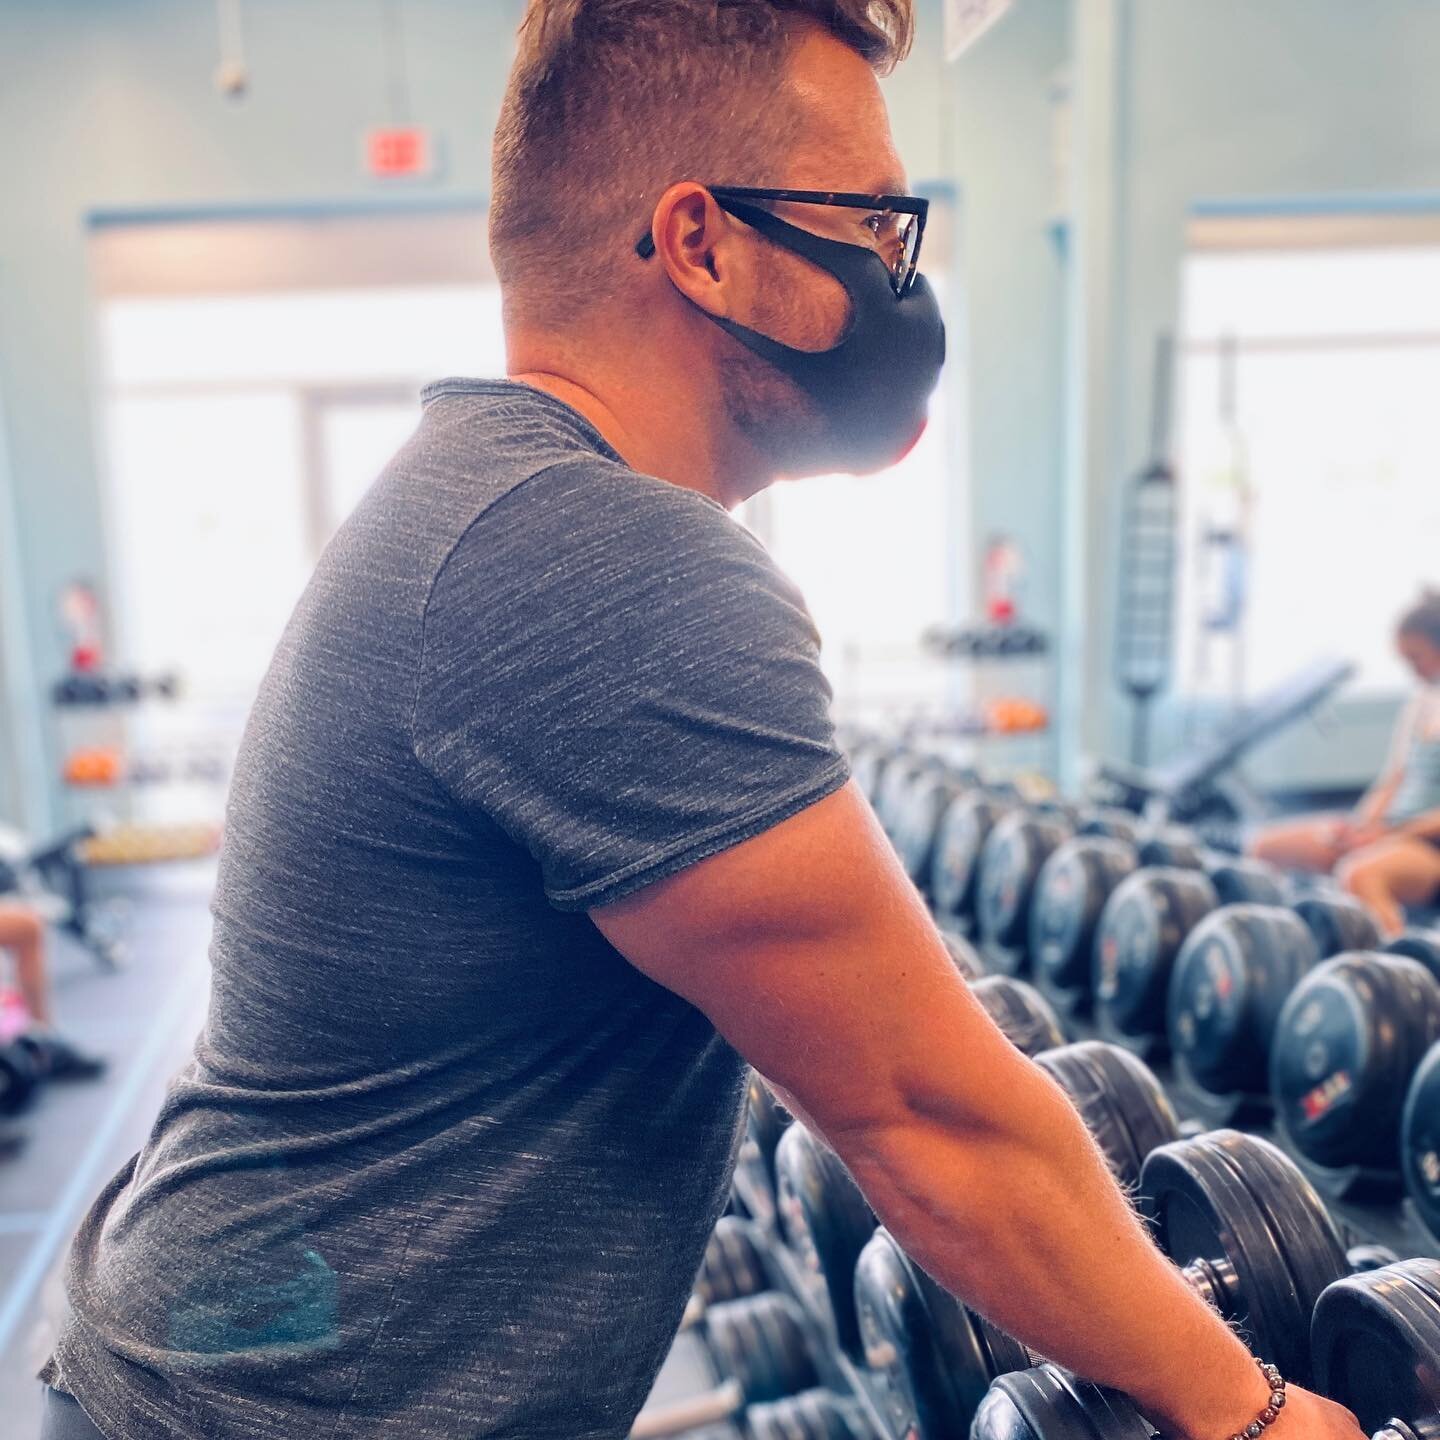 ...&rdquo;𝗖𝗮𝗹𝗺&rdquo;⁣
⁣
Isn&rsquo;t the first word that comes to mind when stepping foot in a weight room, more often than not teeming with swole, sweaty gym bros. But as I grip the dumbbells I already start to feel relief rippling over me.⁣
⁣
T